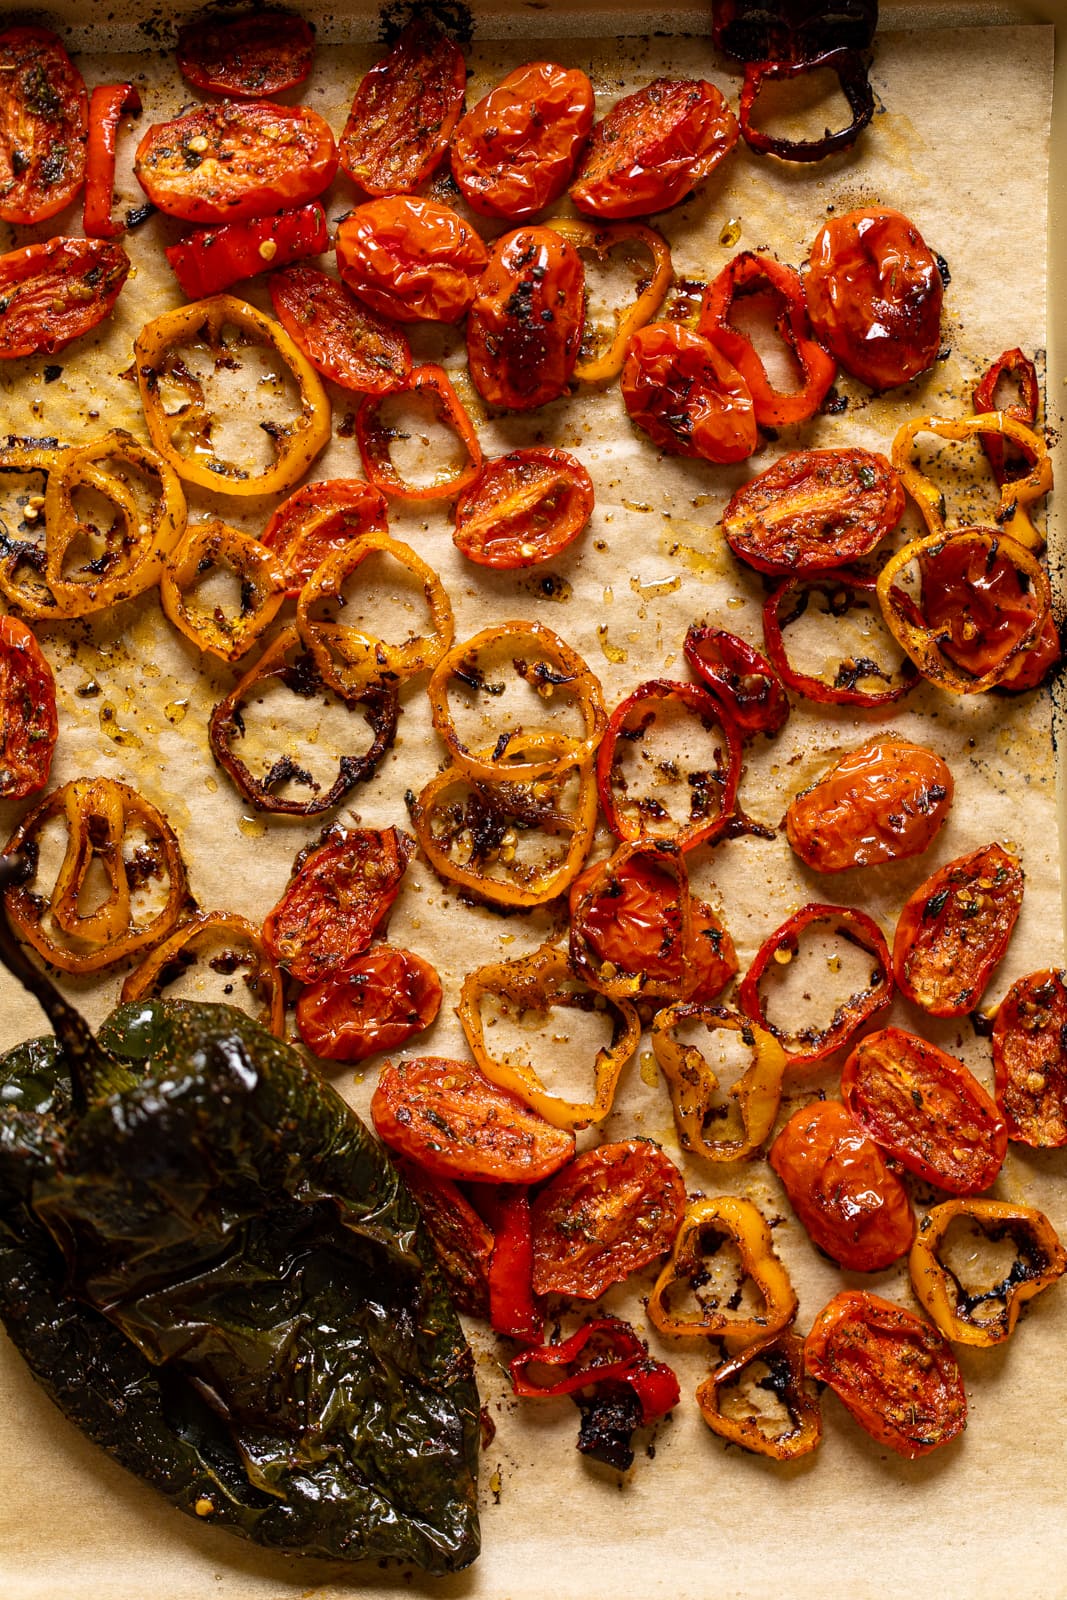 Tray of roasted peppers and tomatoes